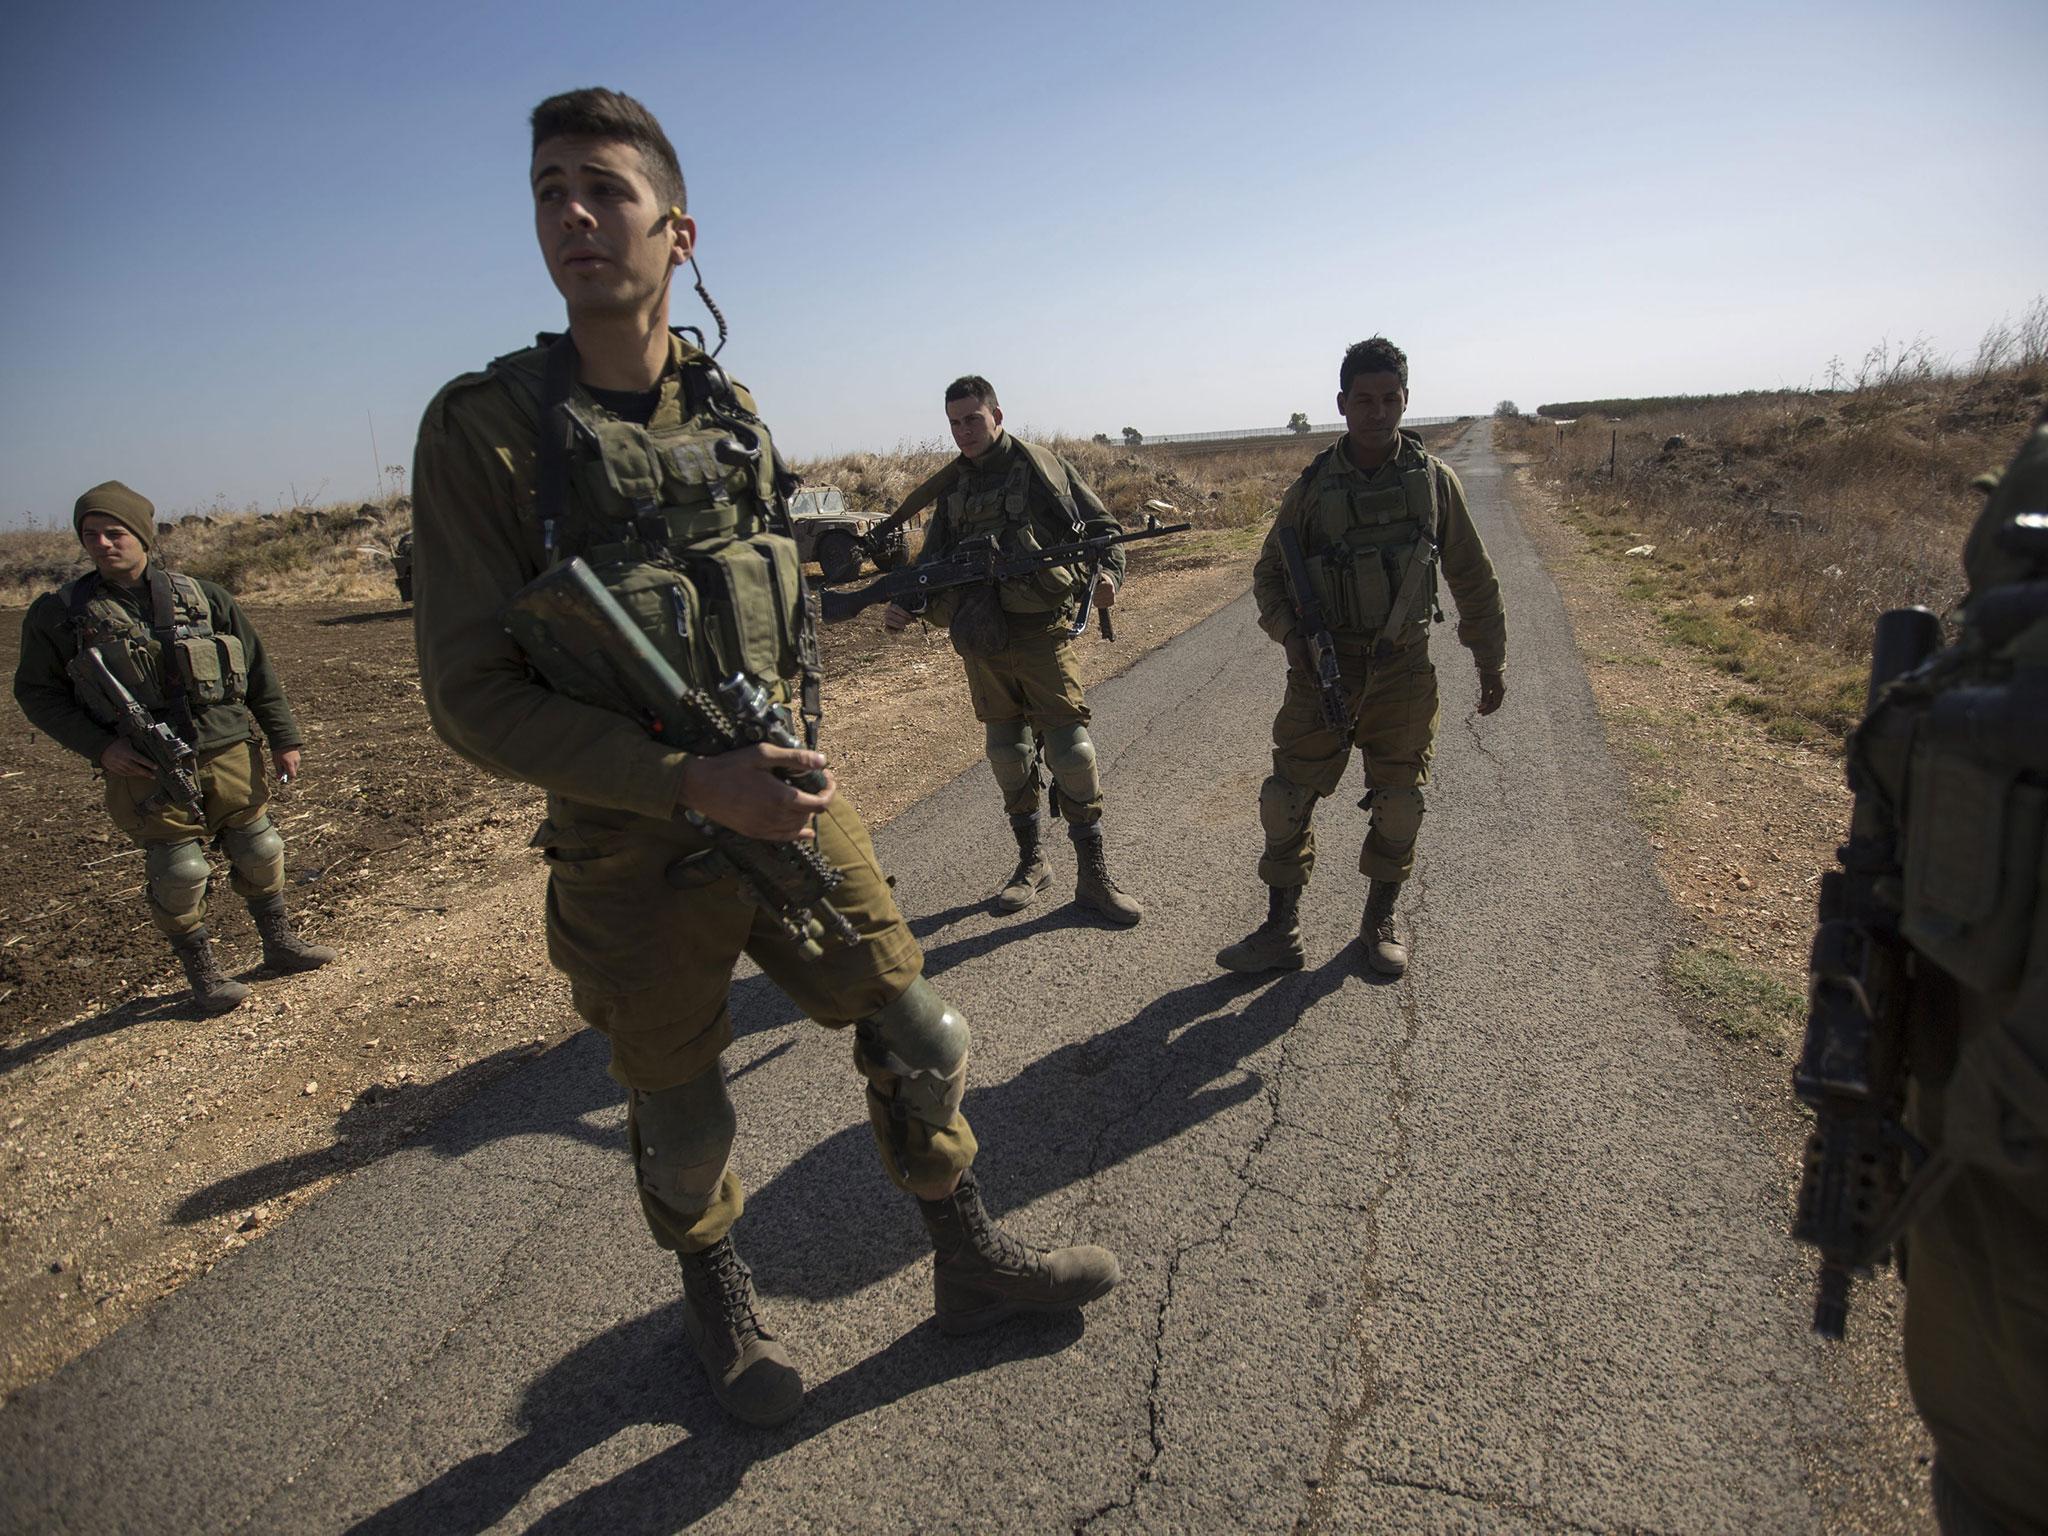 Israeli soldiers on the Syria border, near the village where Isis attacked the Israeli army